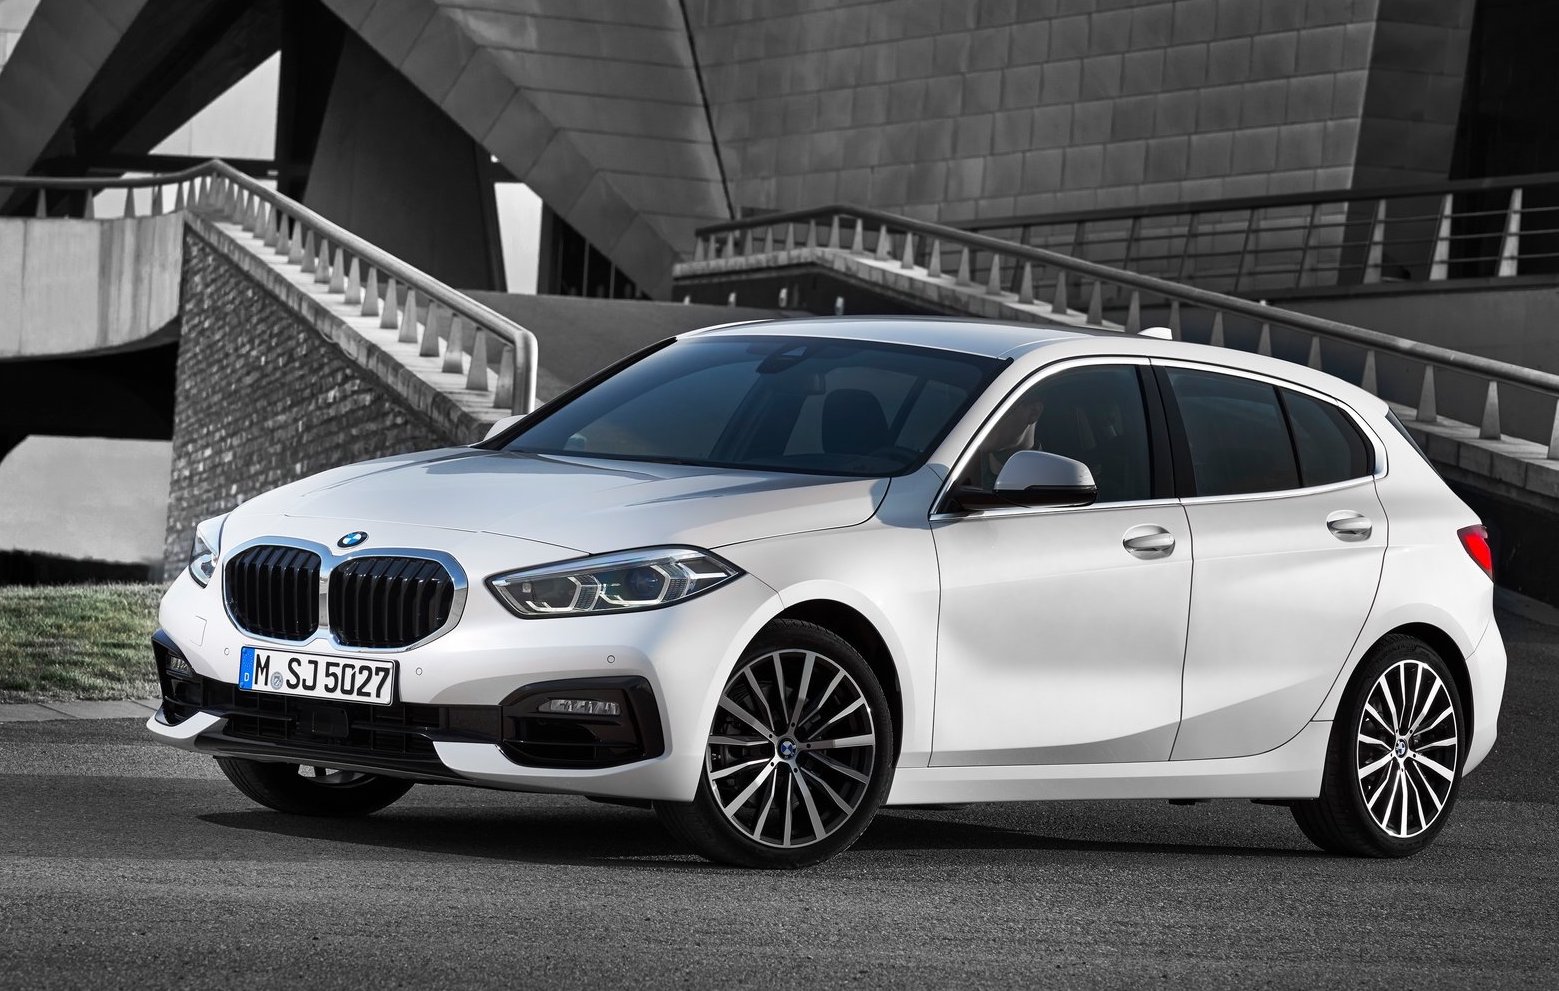 2020 BMW 1 Series revealed, topped by M135i xDrive - PerformanceDrive